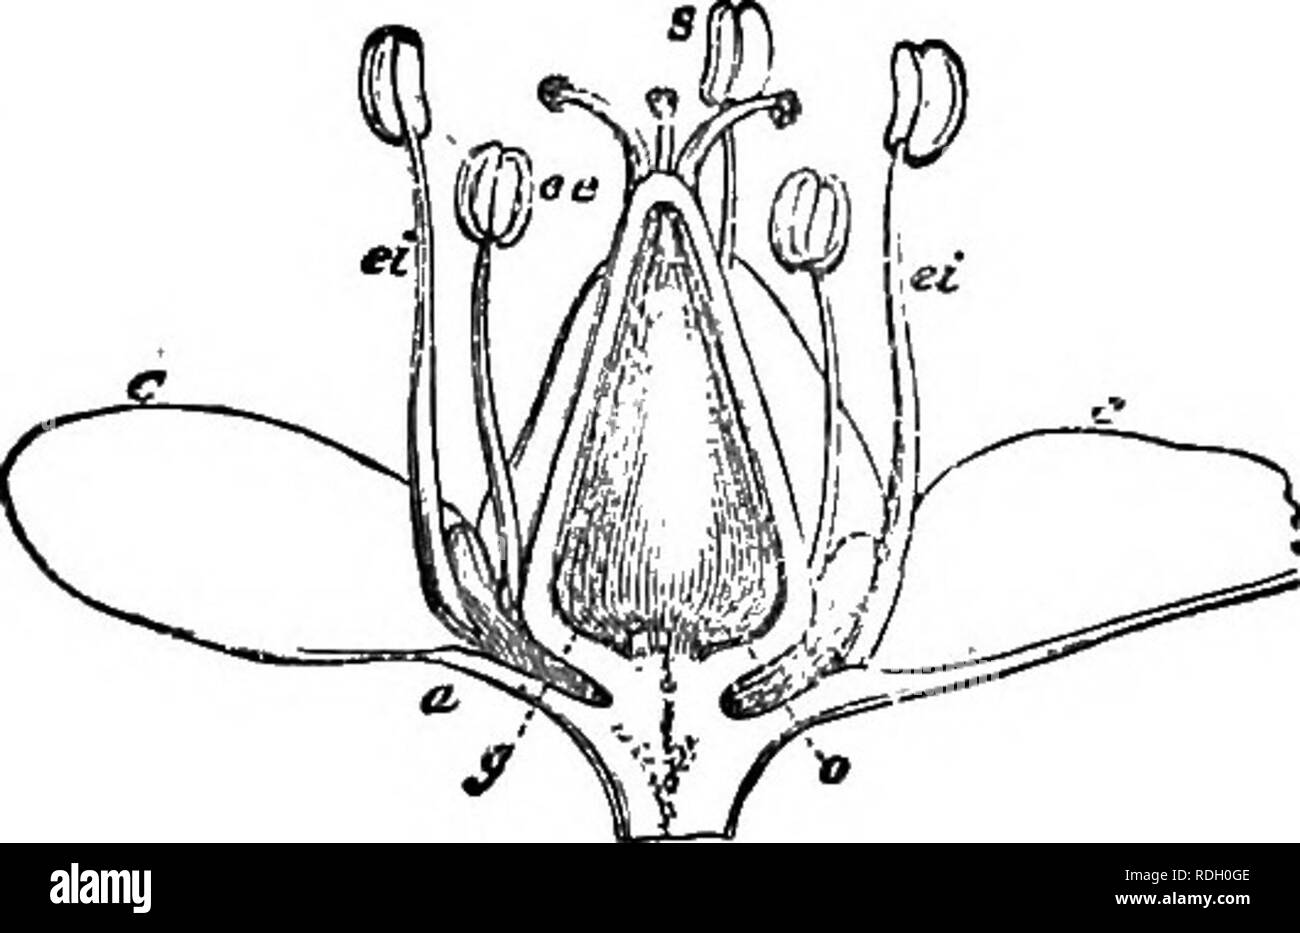 . A Manual of botany : being an introduction to the study of the structure, physiology, and classification of plants . Botany. 564 POLYGONACE^. generally on one side (fig. 800), sometimes in the axis of the albumen ; radicle superior (fig. 800).—Herbaceous, rarely shrubby plants, with alternate, stipulate, or exstipulate leaves, and often unisexual fiowers. They are found in almost all parts of the world, more especially in the temperate regions of the northern hemisphere. They grow in fields, waste-grounds, ditches, mountains, etc. The order has been divided. Please note that these images are Stock Photo